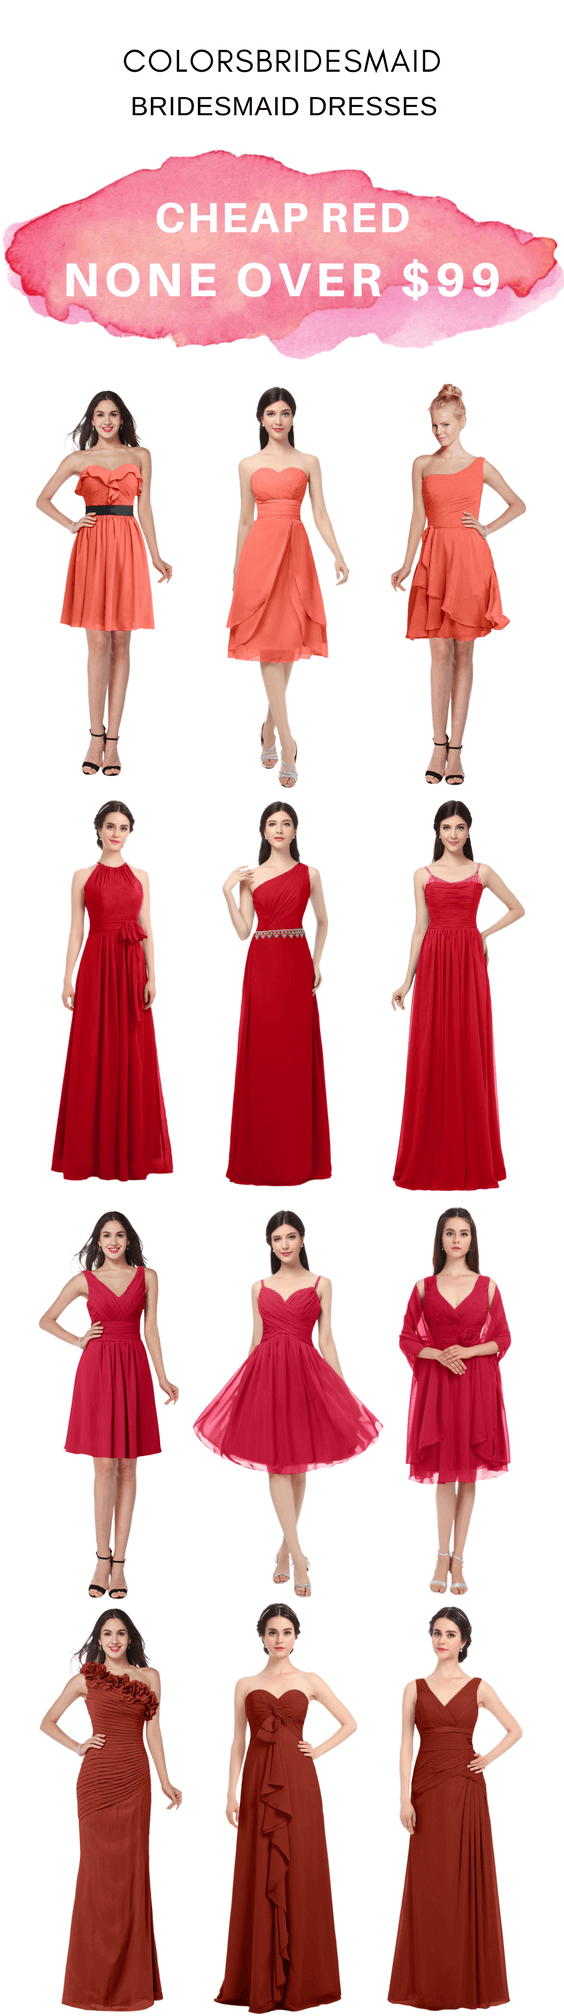 Cheap Red Bridesmaid Dresses in Living Coral, Red, Lollipop and Rust Colors